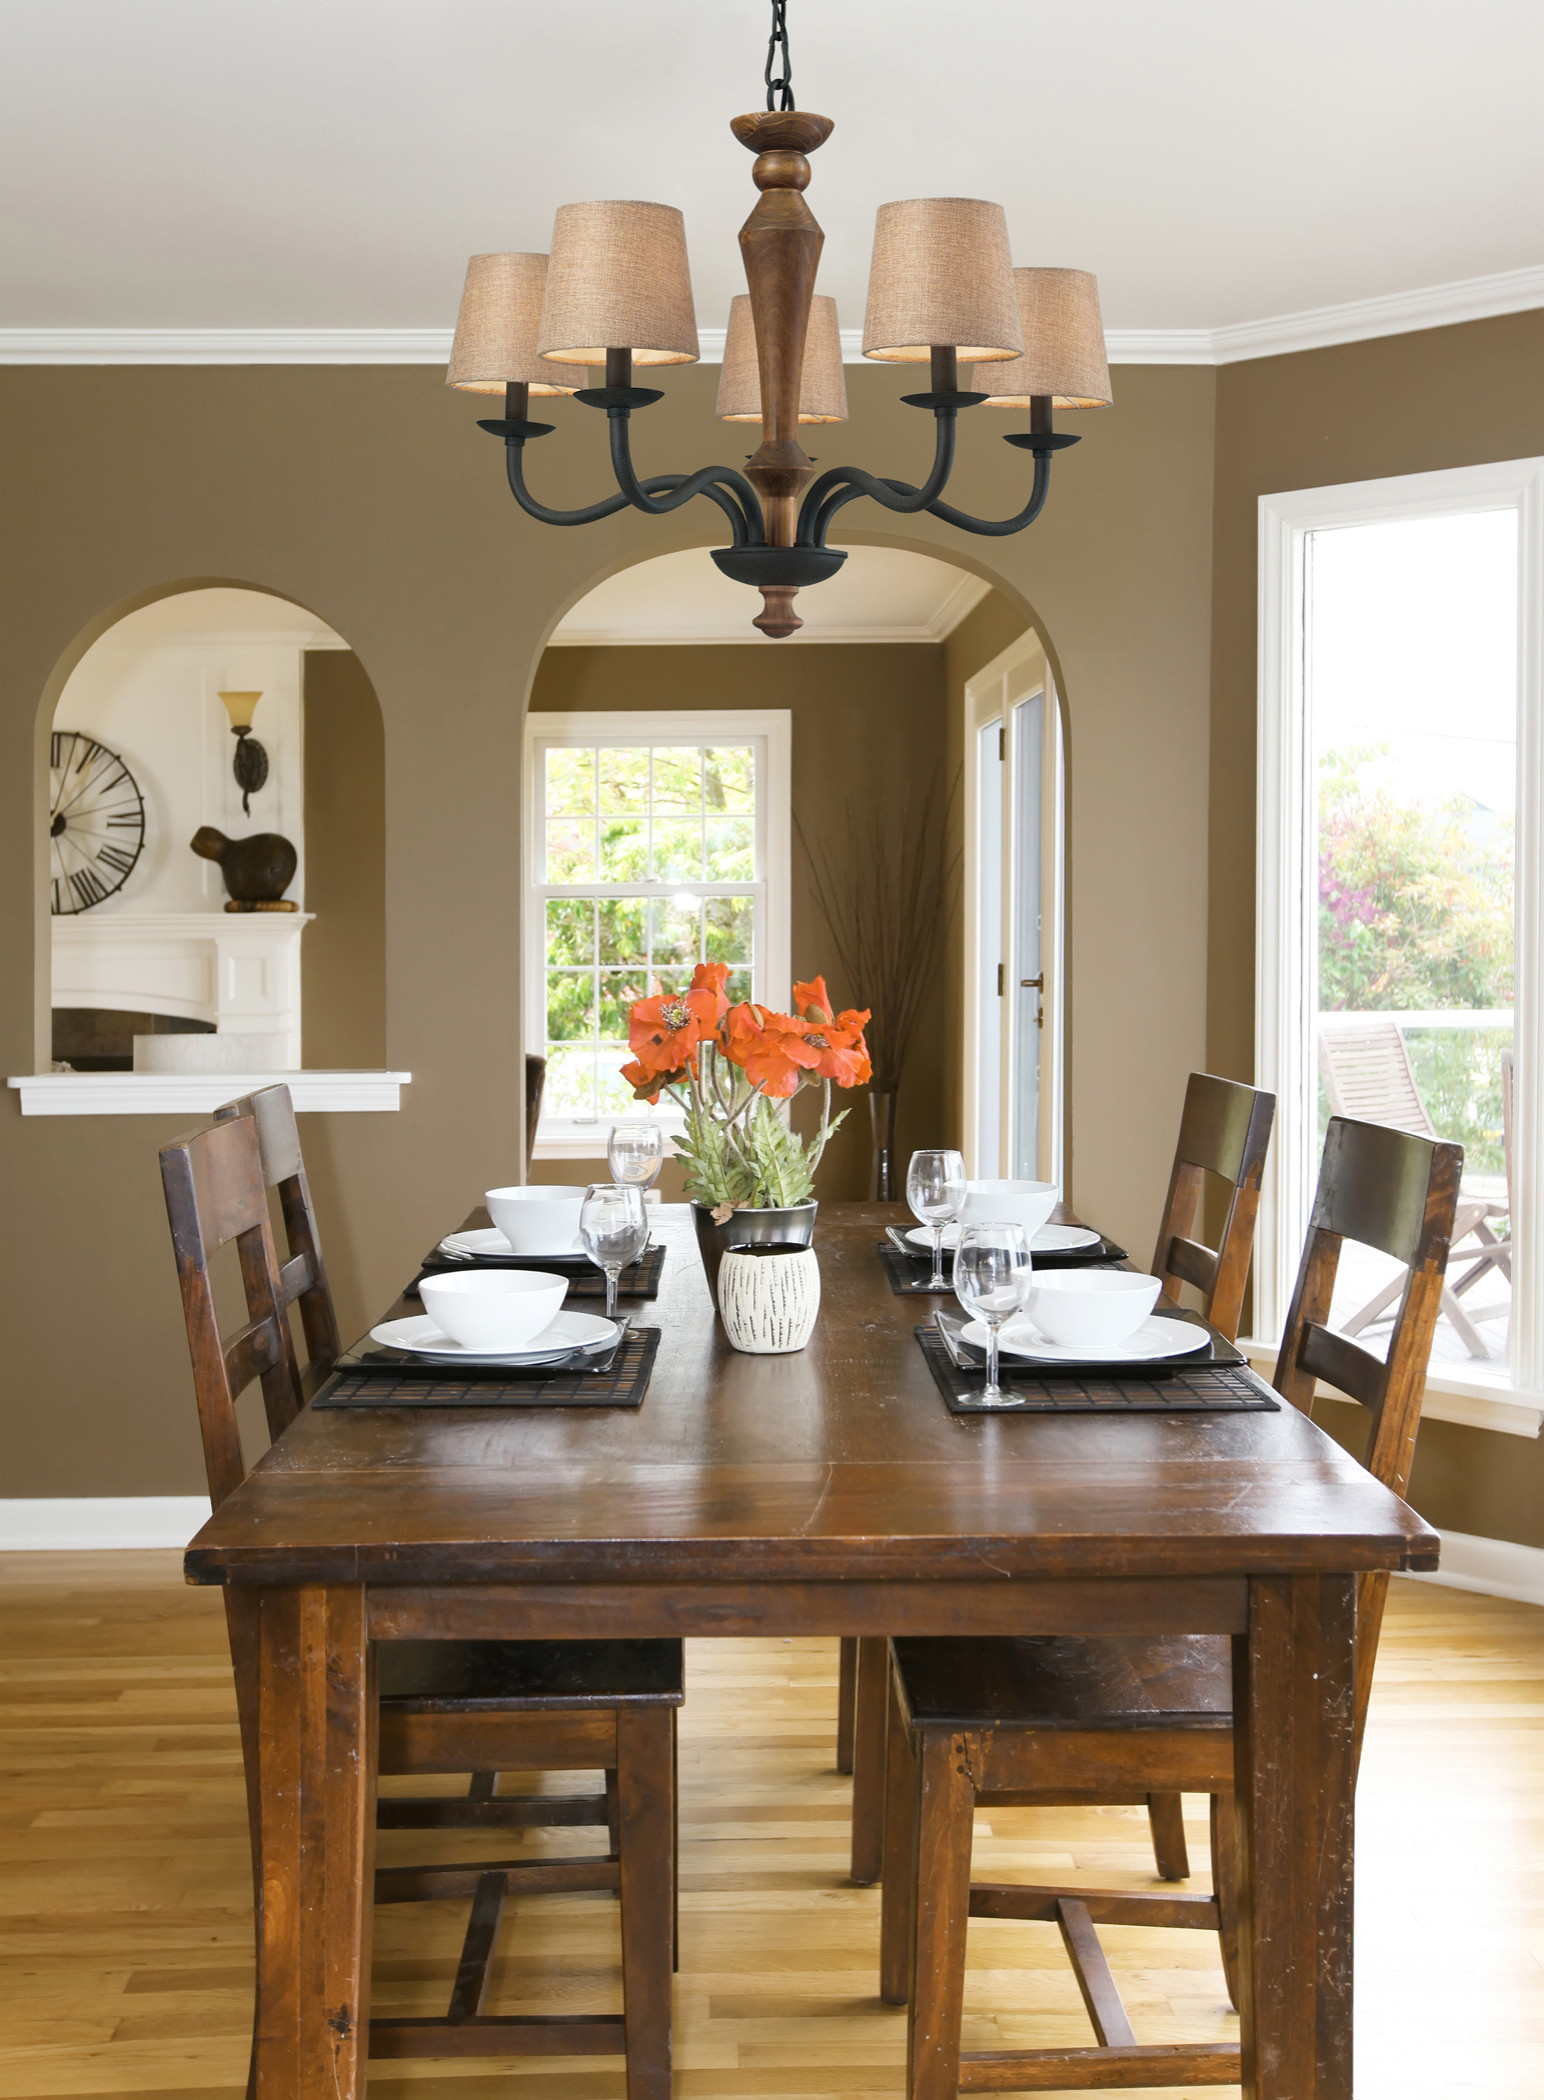 Early American Dining Room - Photos & Ideas | Houzz